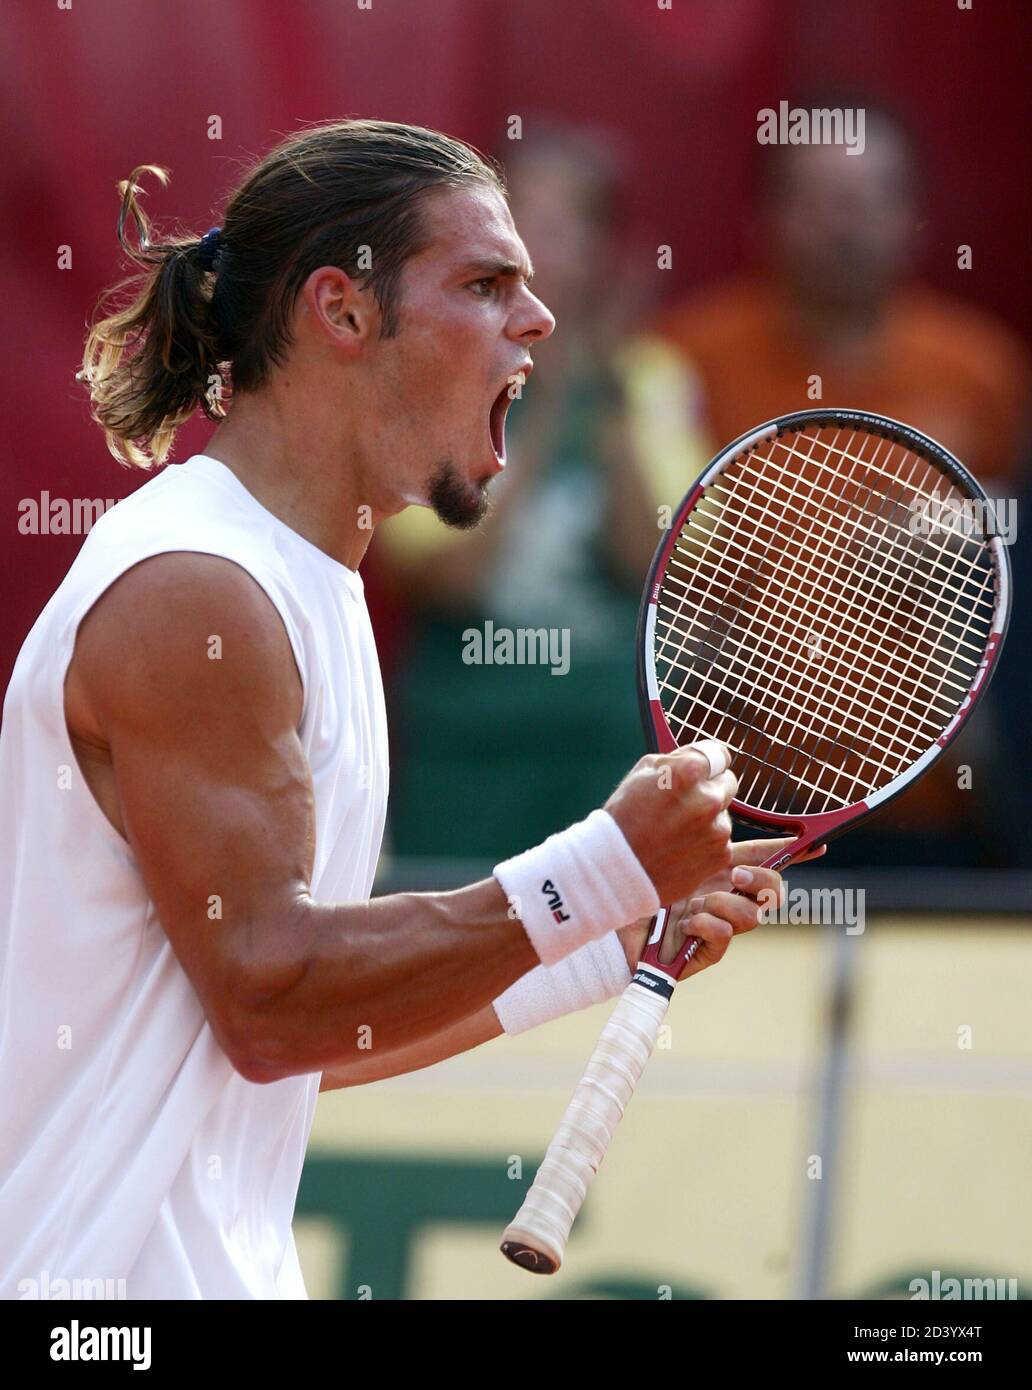 Austria's Koellerer celebrates a point against Tabara of the Czech Republic  in a first round match at the Kitzbuehel Open tennis tournament in Austria.  Austria's Daniel Koellerer celebrates a point against Michal